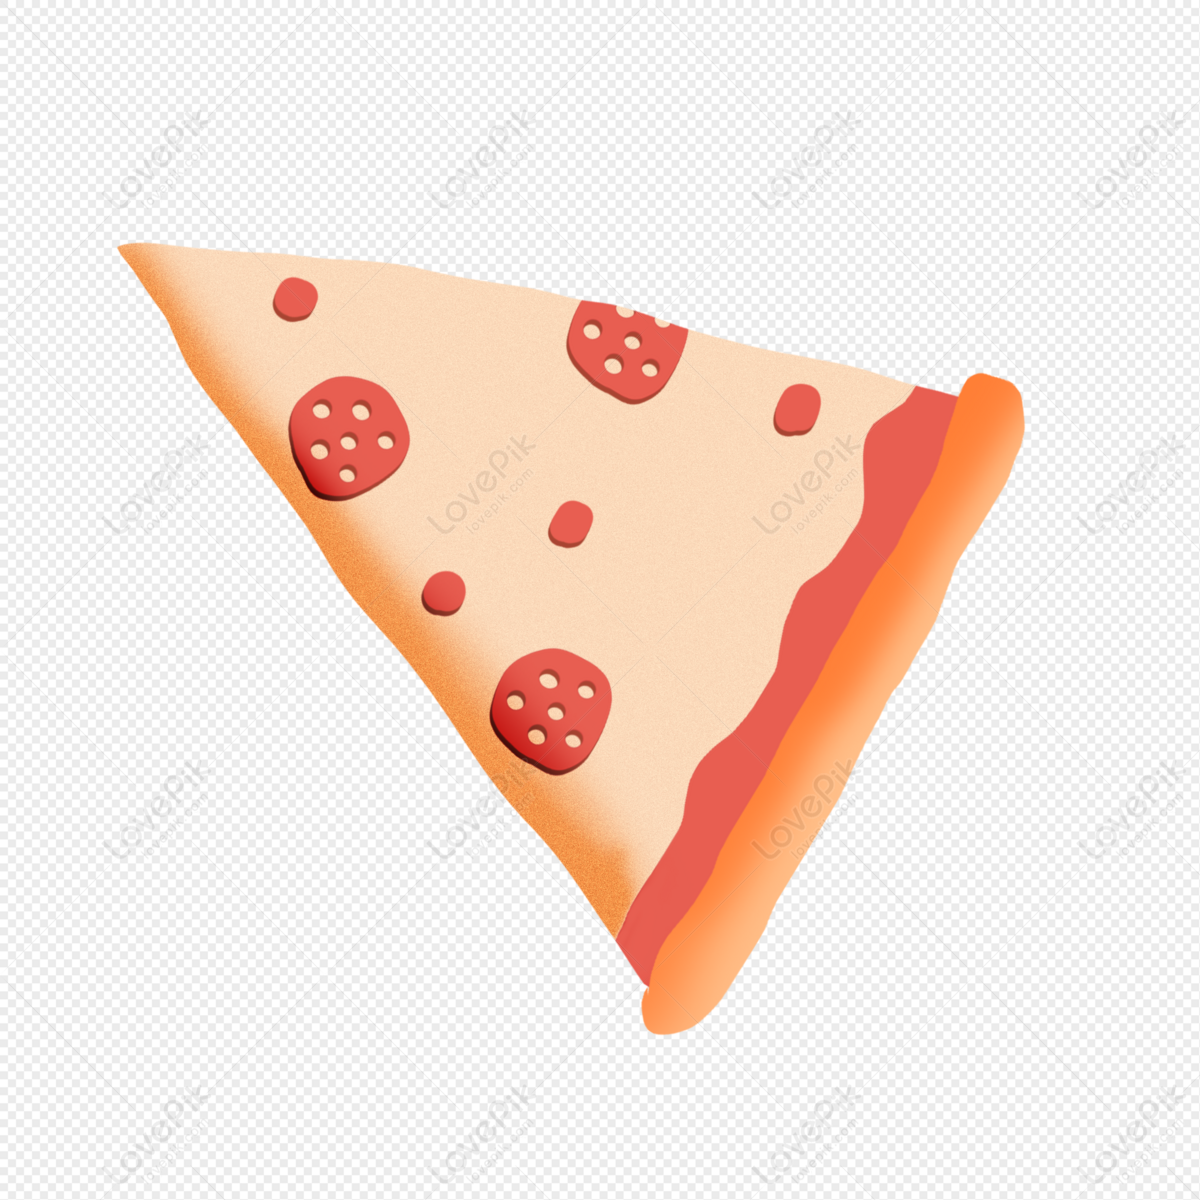 Hand Drawn Cartoon Pizza PNG Hd Transparent Image And Clipart Image For  Free Download - Lovepik | 401272664